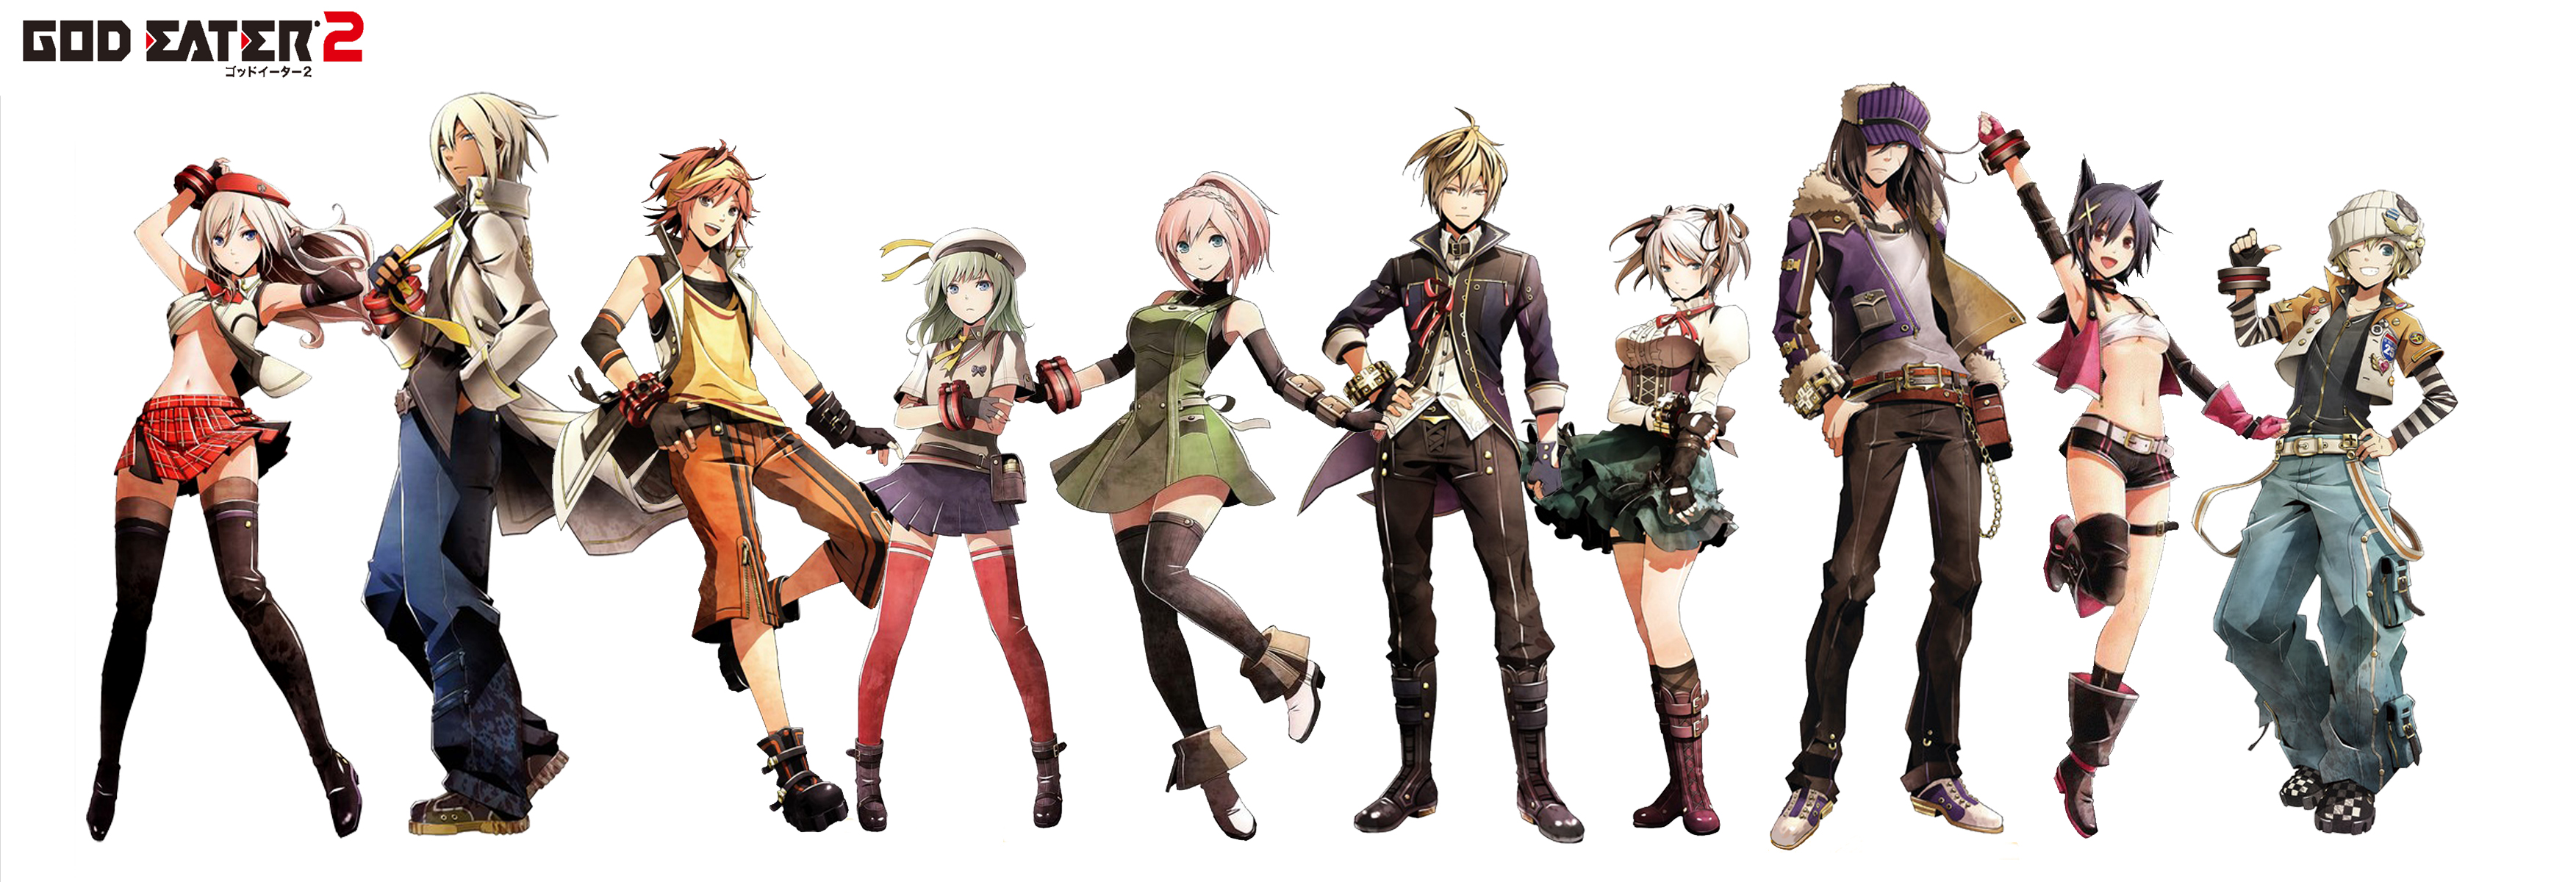 God_Eater_2_Characters